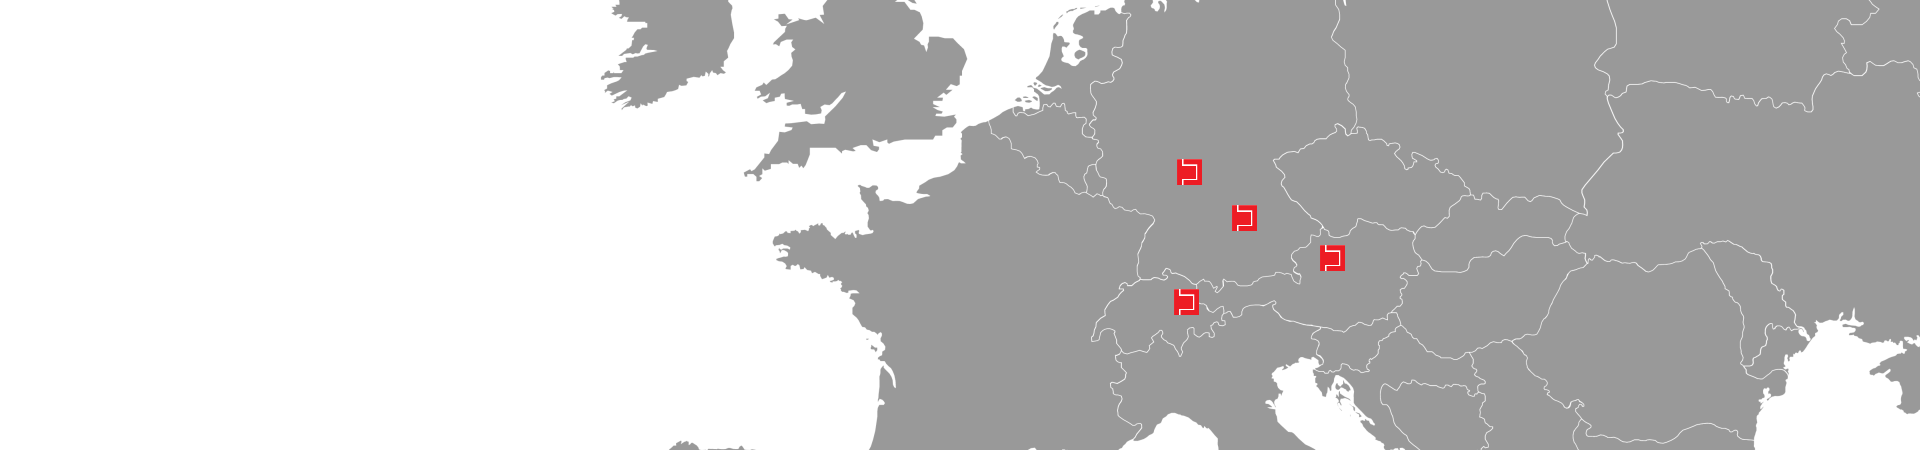 Our locations in the DACH region